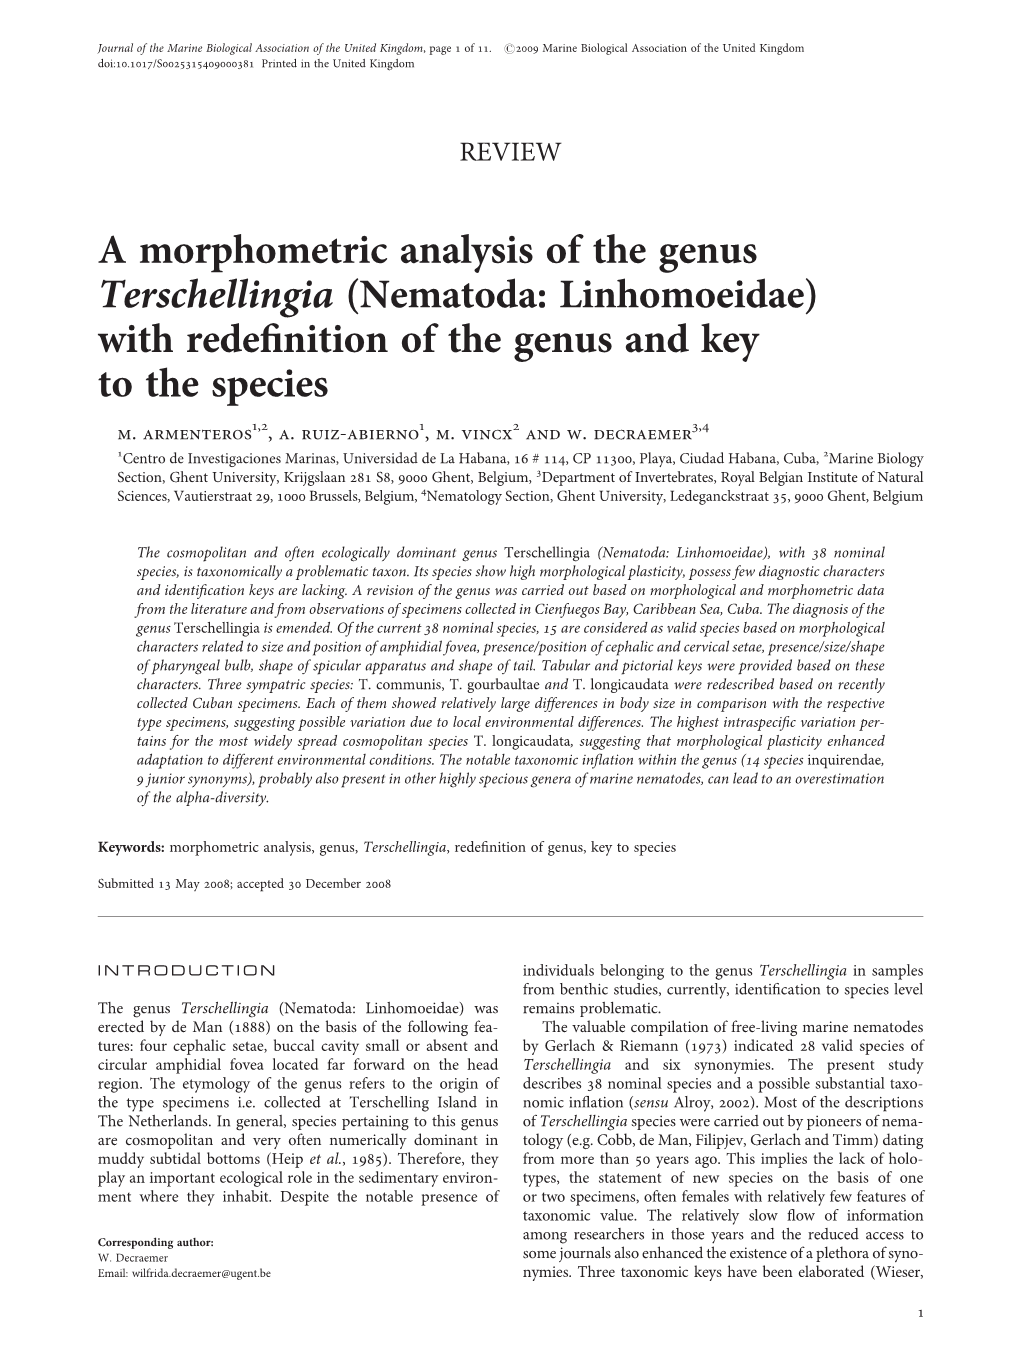 A Morphometric Analysis of the Genus Terschellingia (Nematoda: Linhomoeidae) with Redeﬁnition of the Genus and Key to the Species M